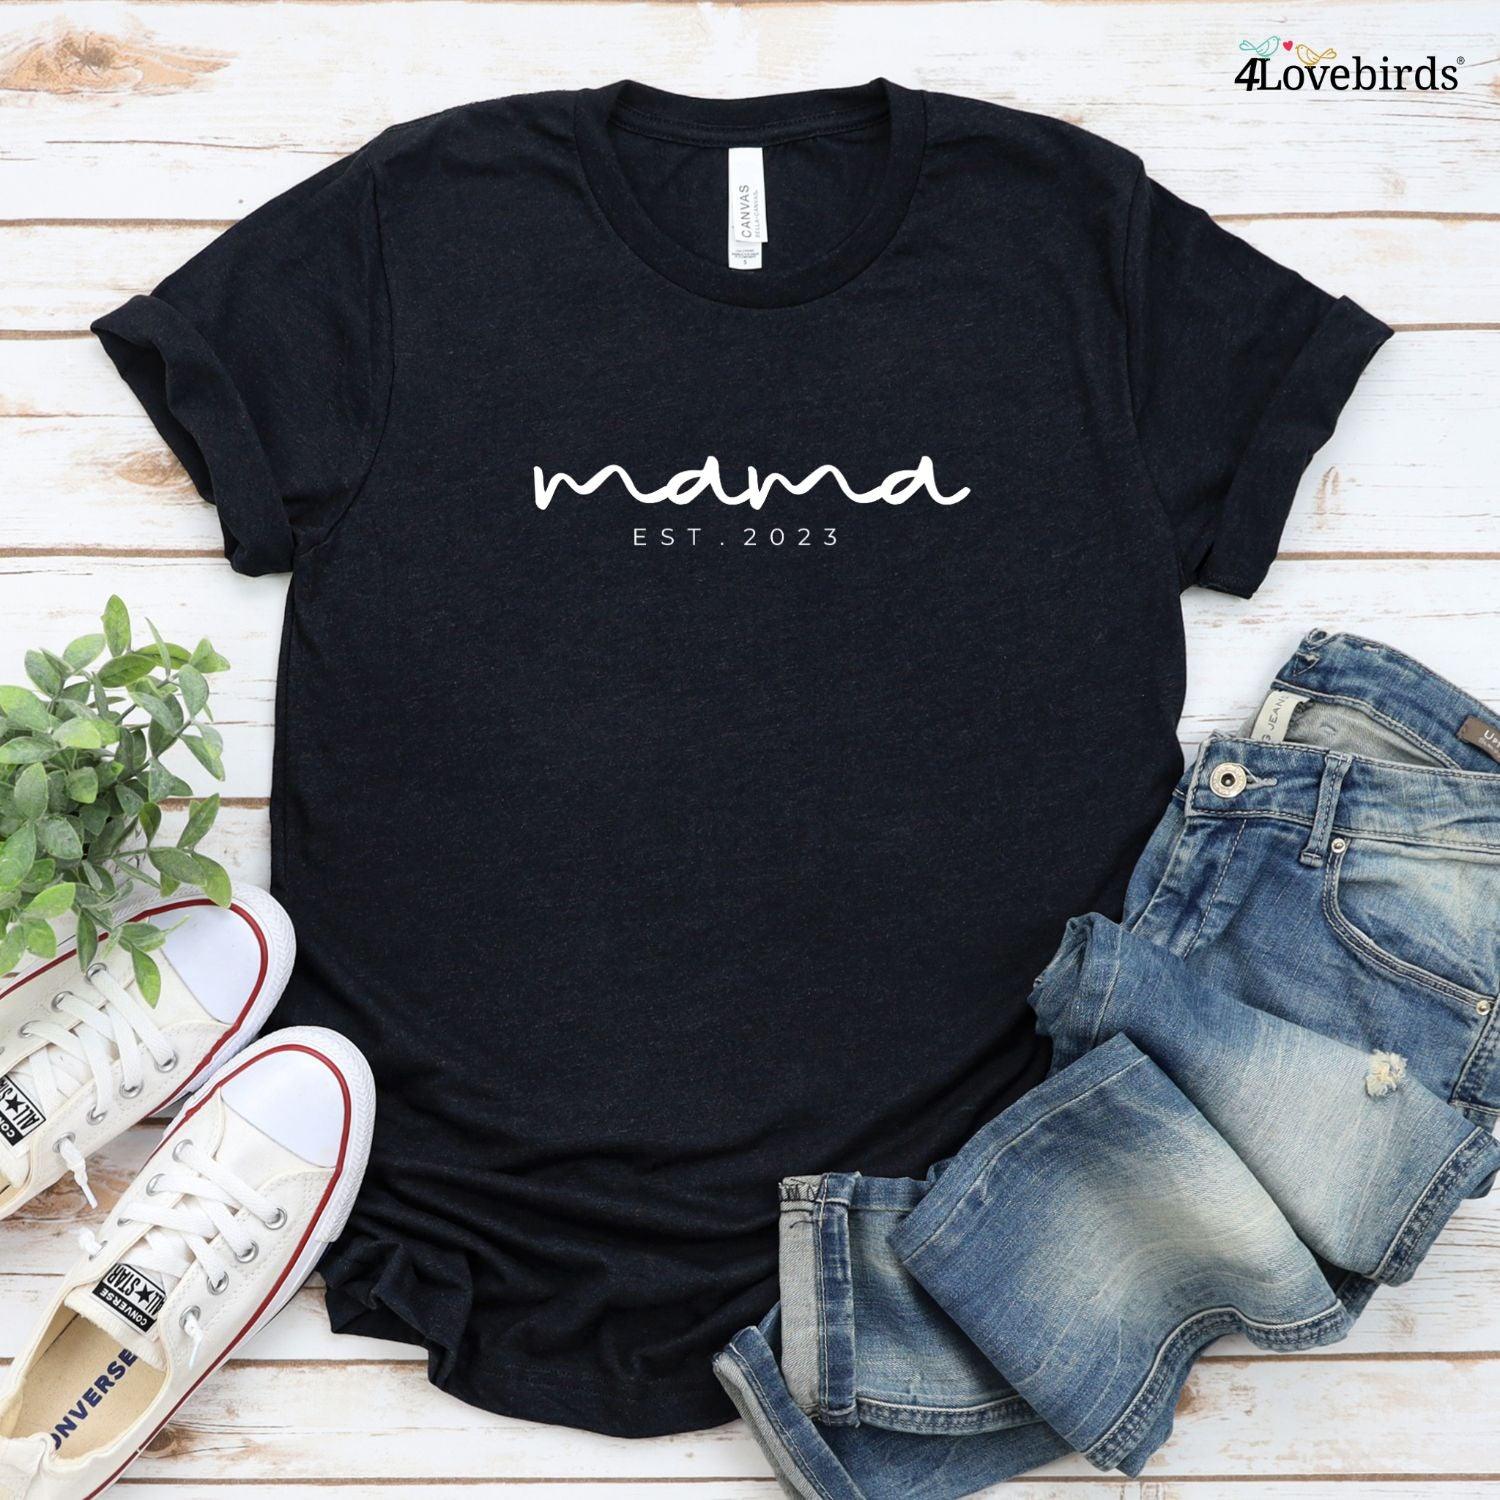 Mama/Dada Custom EST Matching Outfits - Perfect Gift for Parents on Mom's/Dad's Day - 4Lovebirds